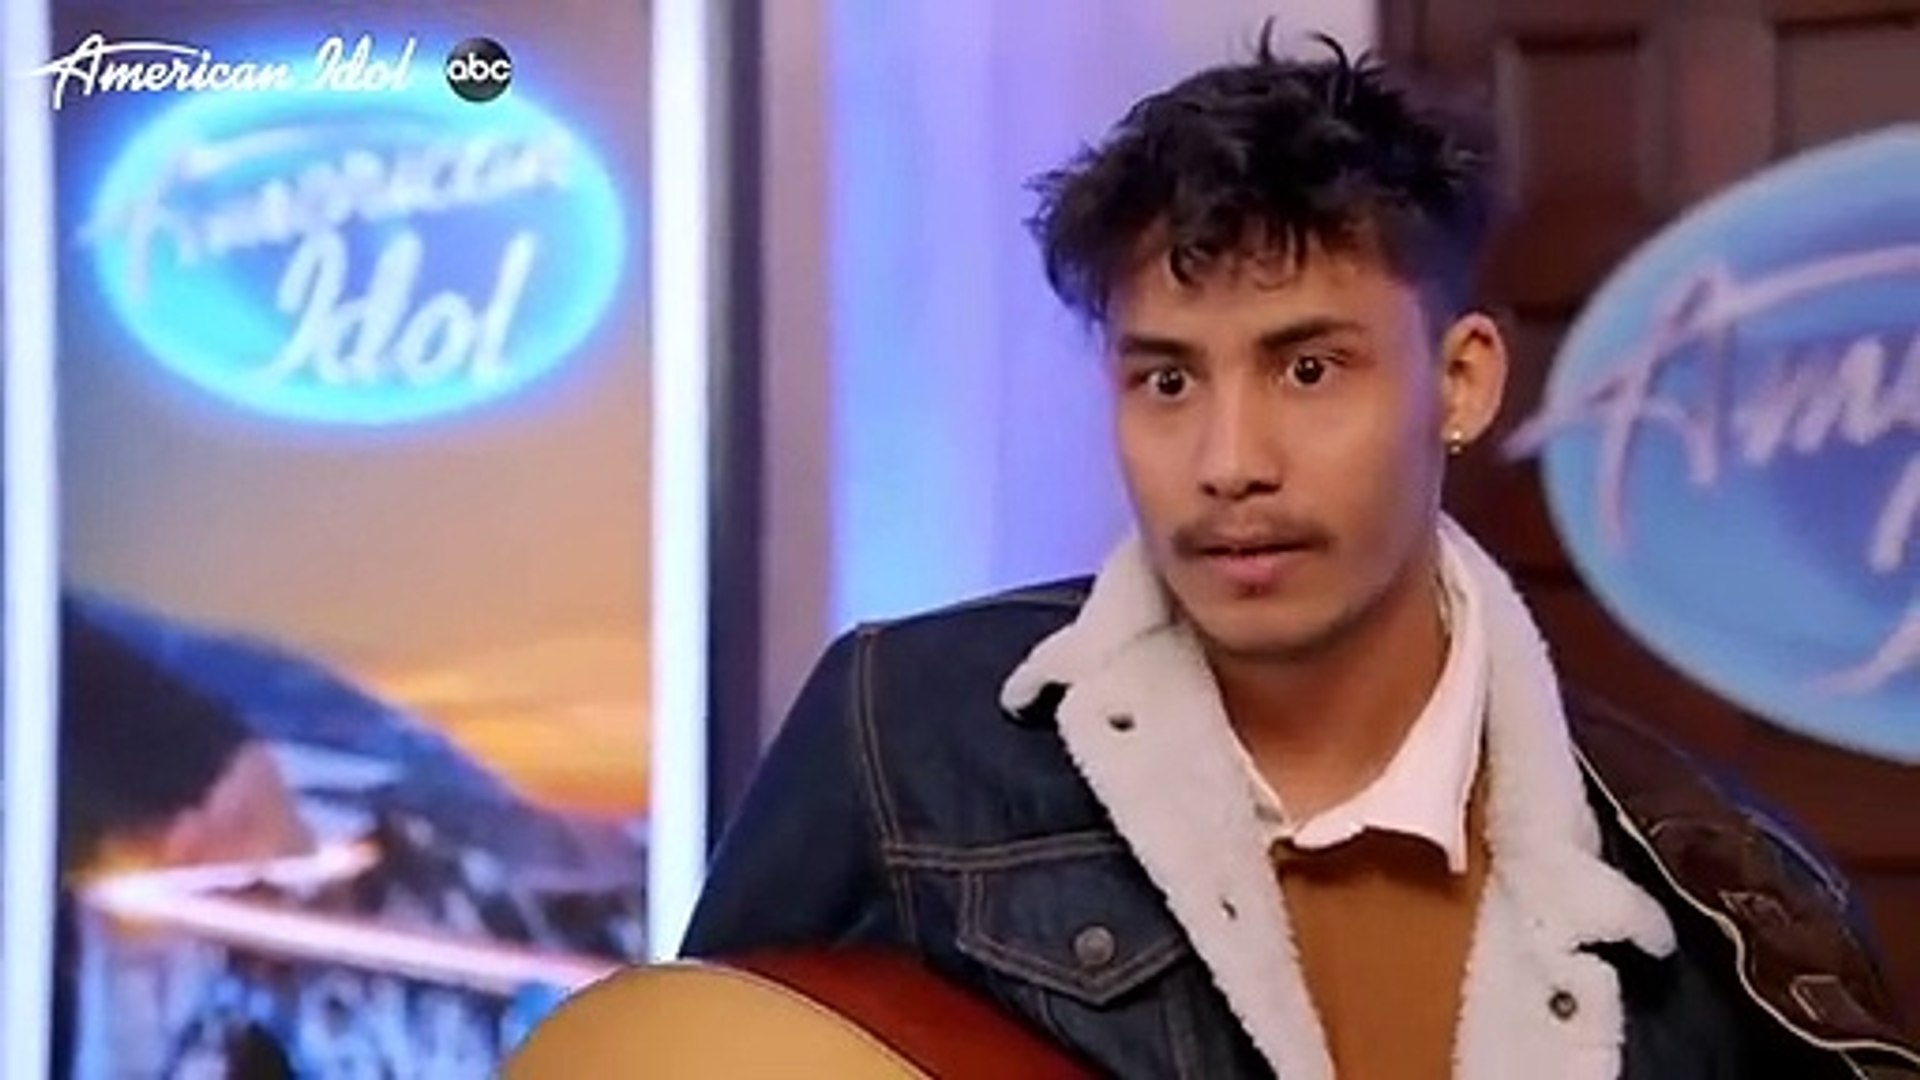 Arthur Gunn Puts an INCREDIBLE Spin on a Creedence Clearwater Revival Classic - American Idol 2020